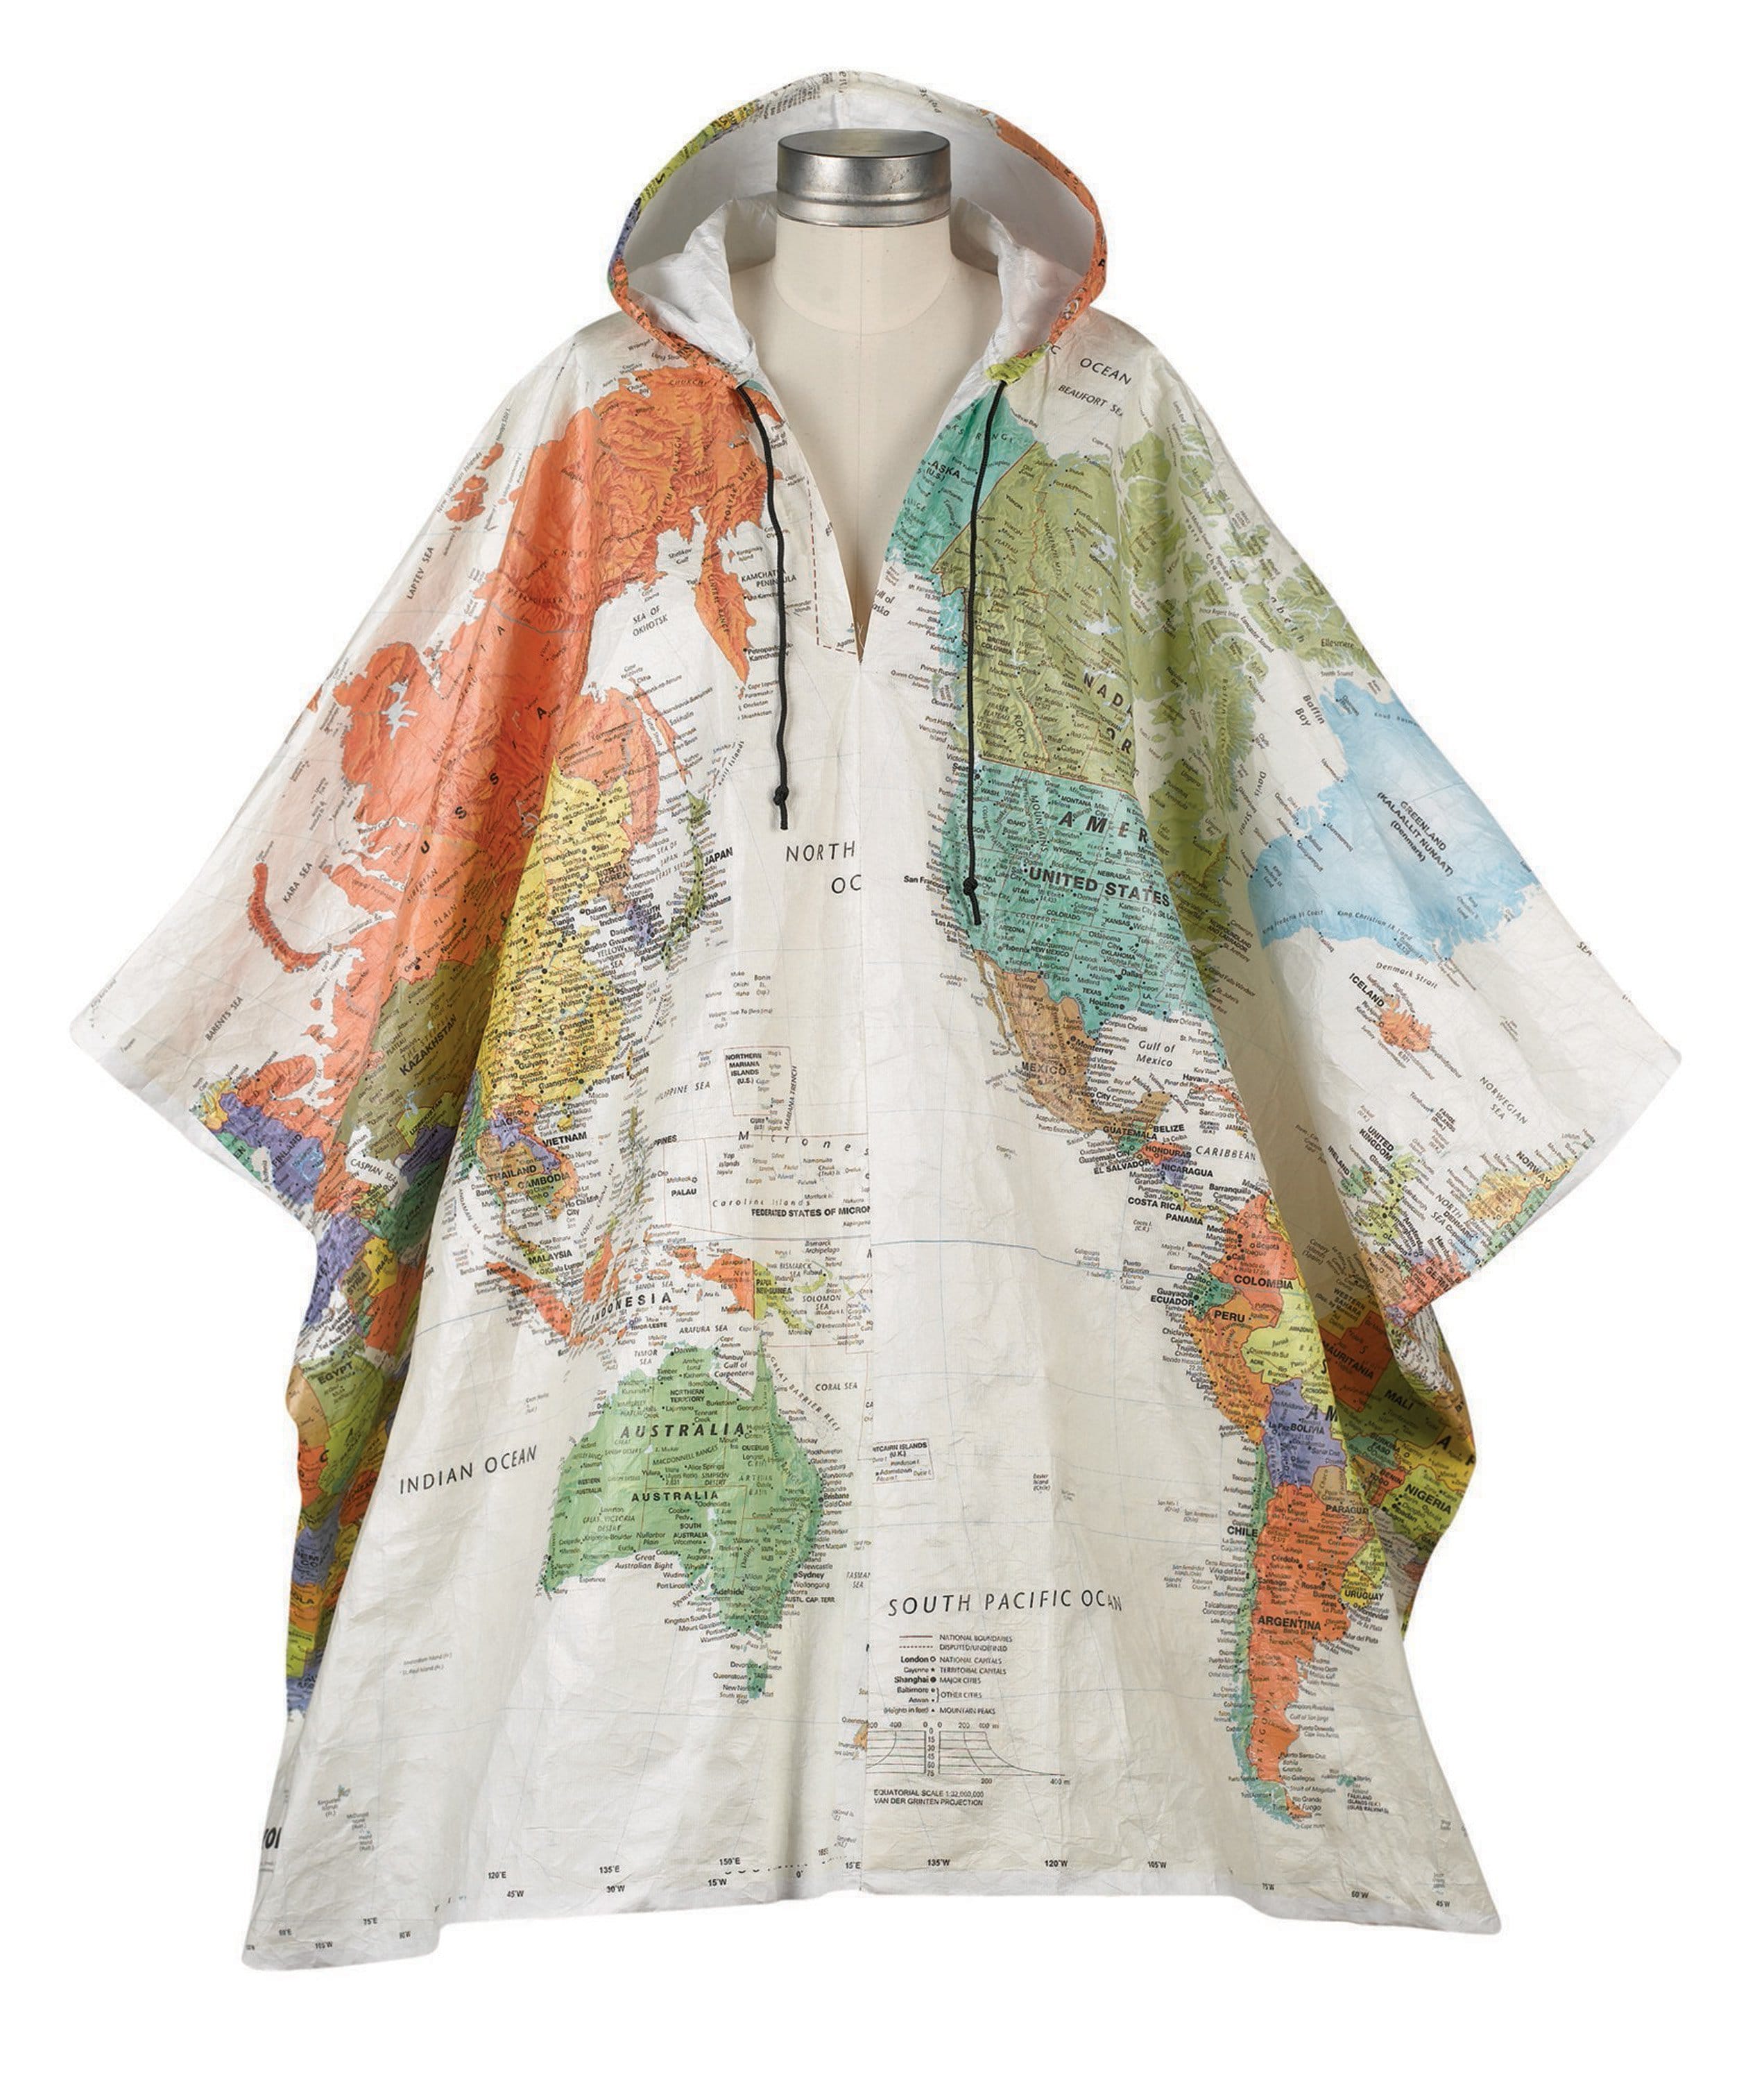 Water-resistant world map poncho for $39.95 from Signals.com, an Ohio-based company, which also offers a bangle and two types of world map scarves for draping yourself in cartographic splendor.